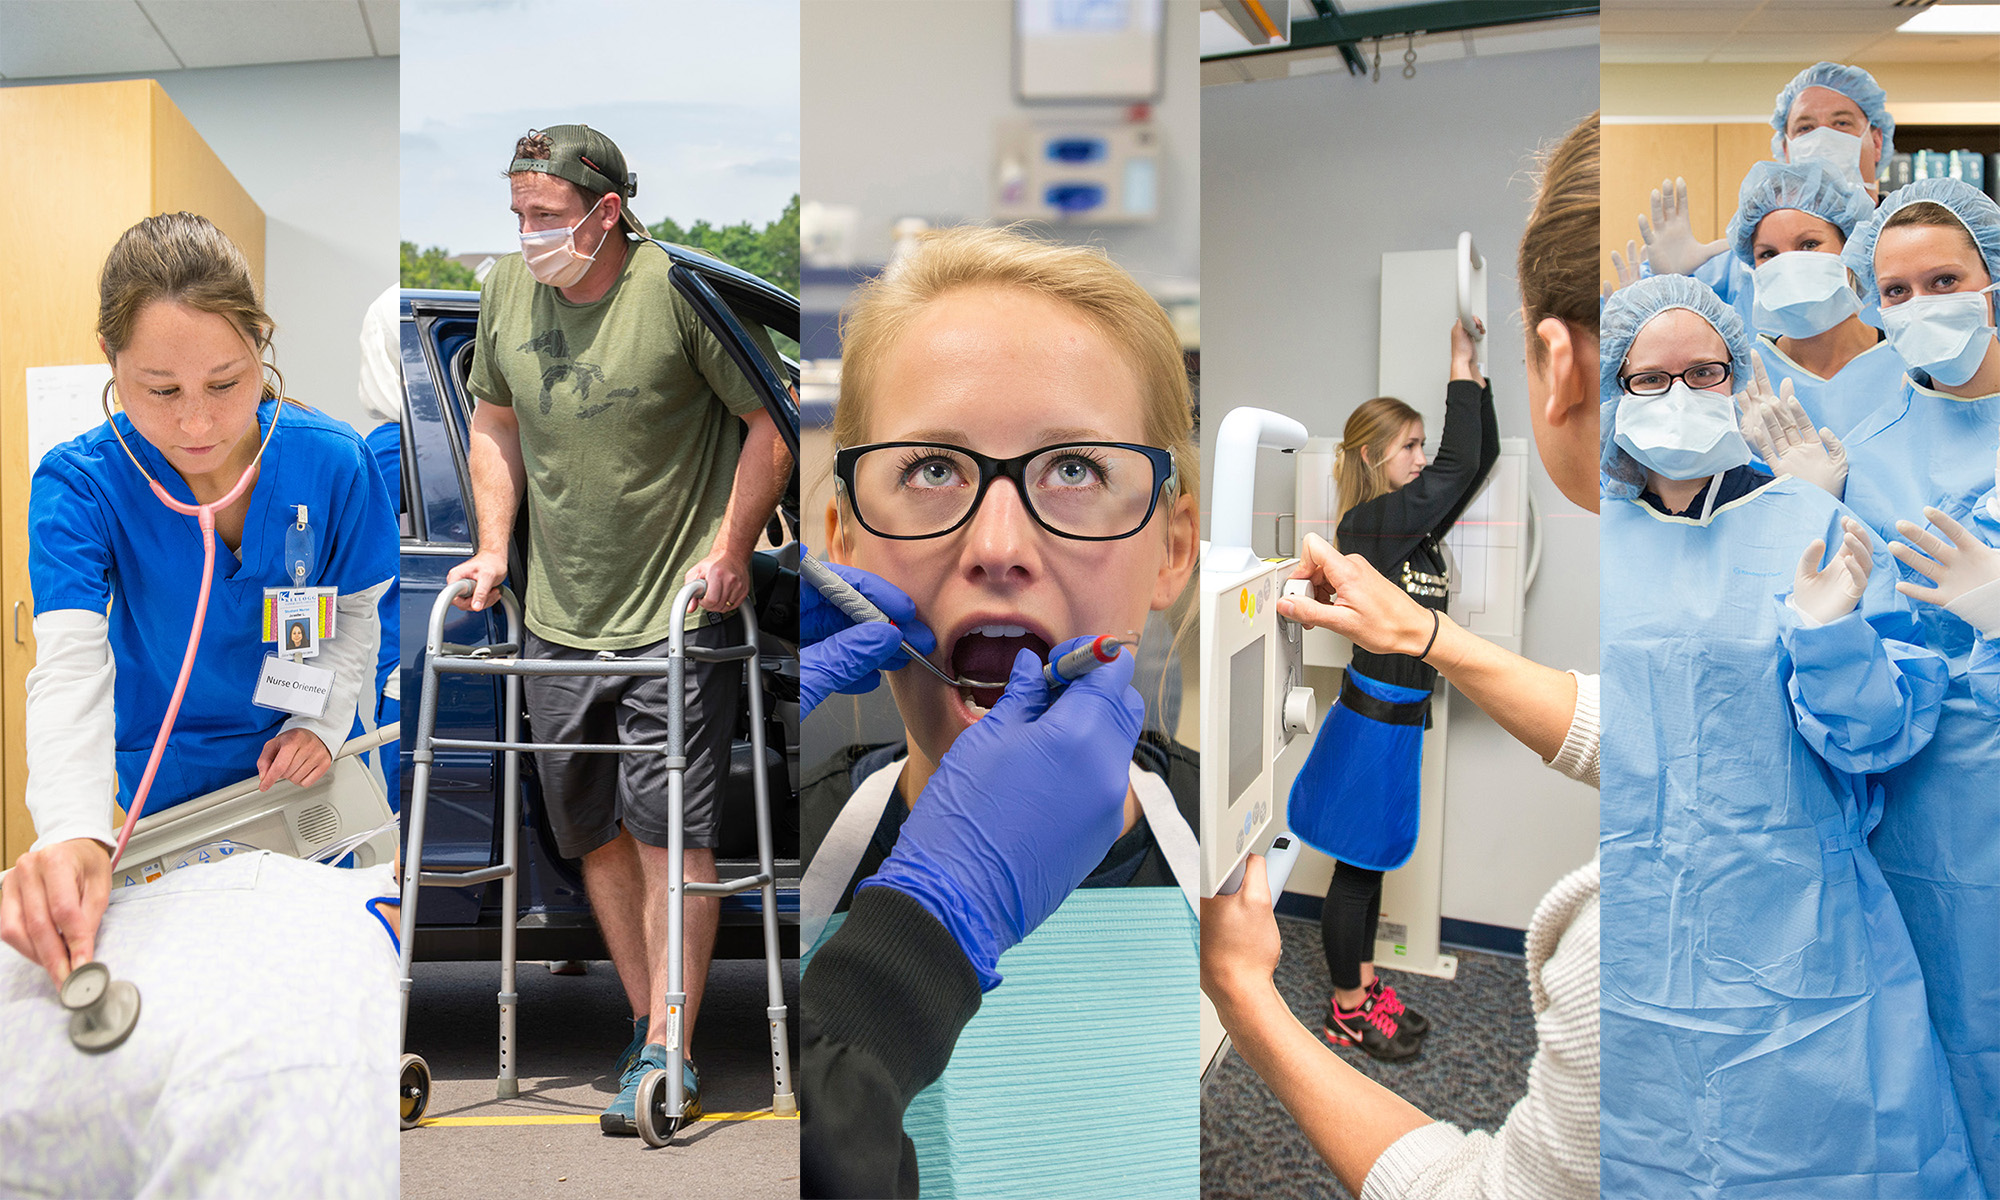 A collage of Nursing and Allied Health students performing various activities related to their disciplines.